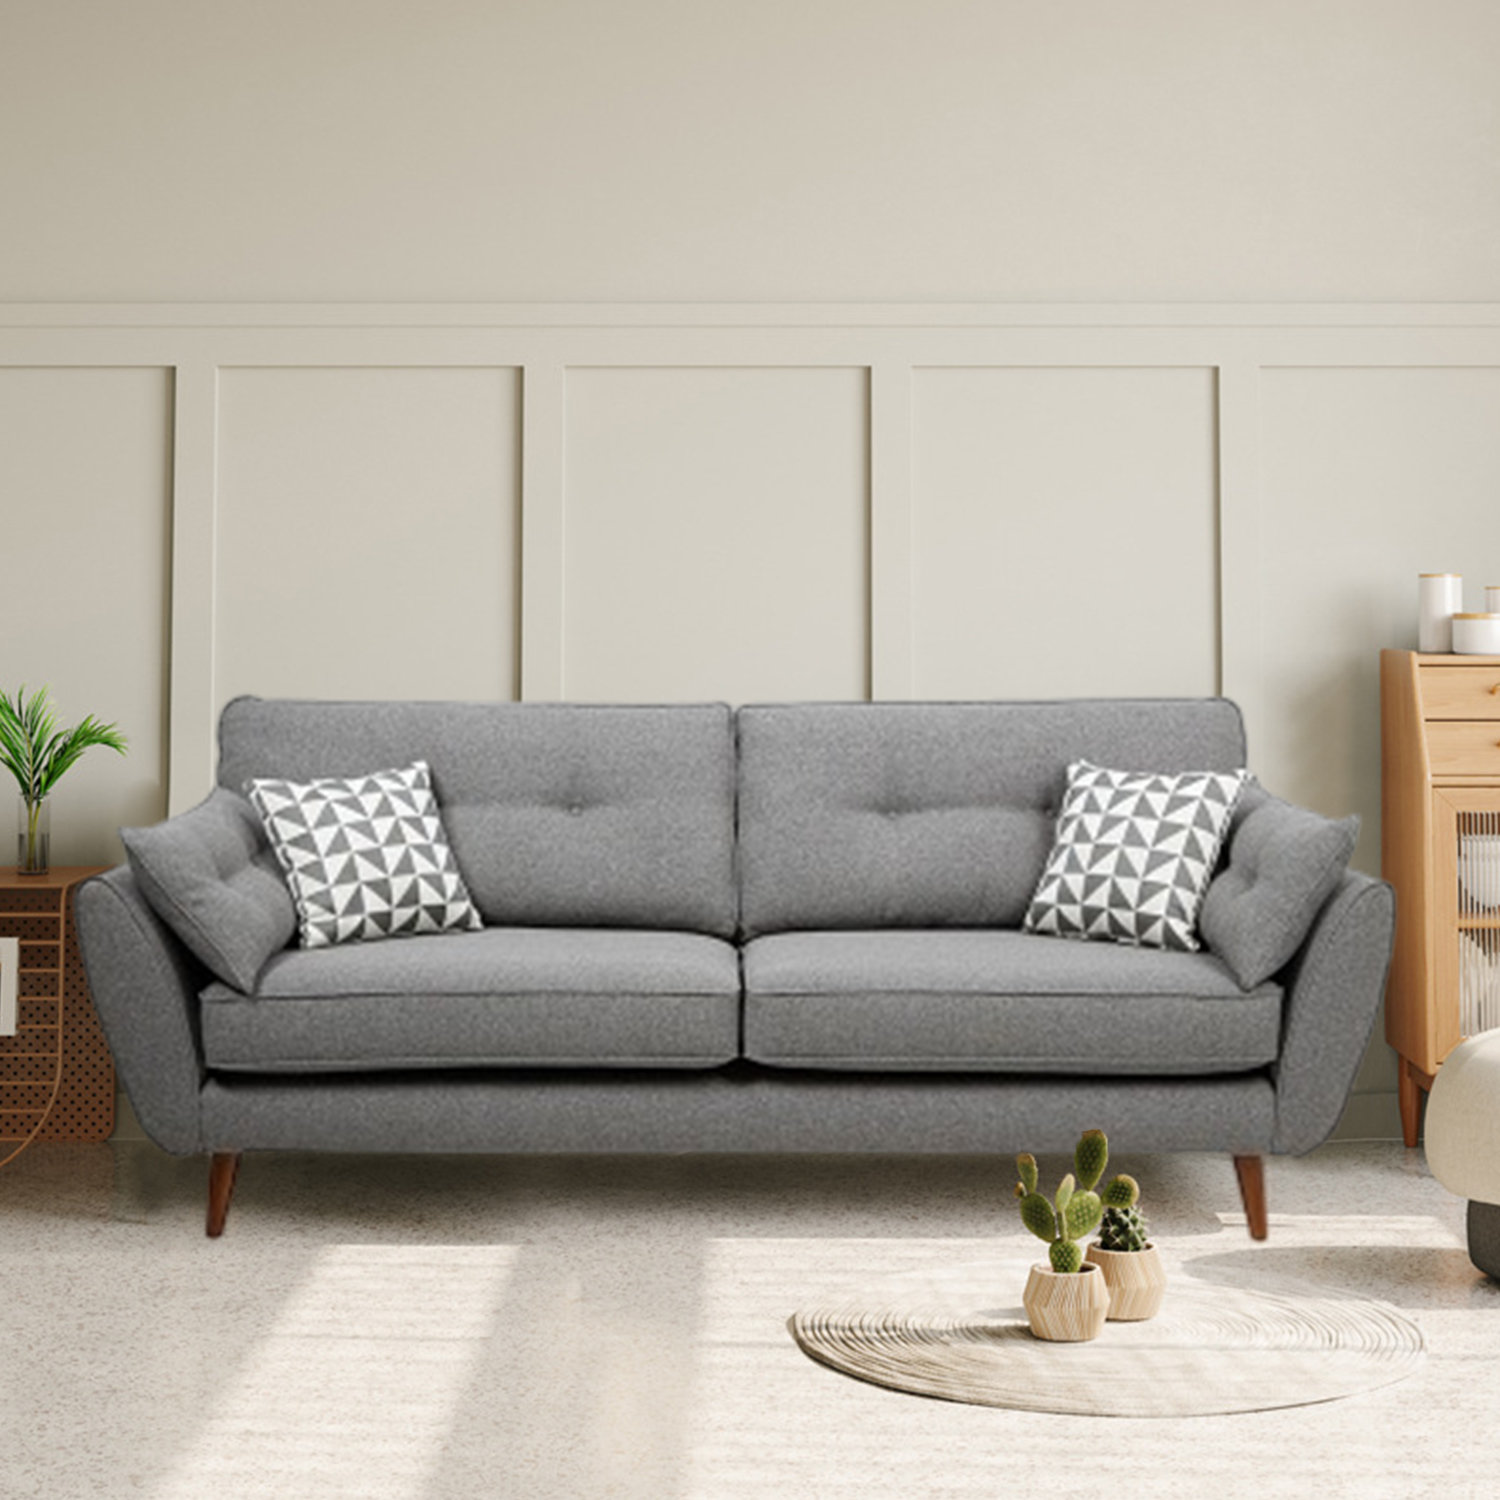 The latest leather sofa designed by DFS and French Connection